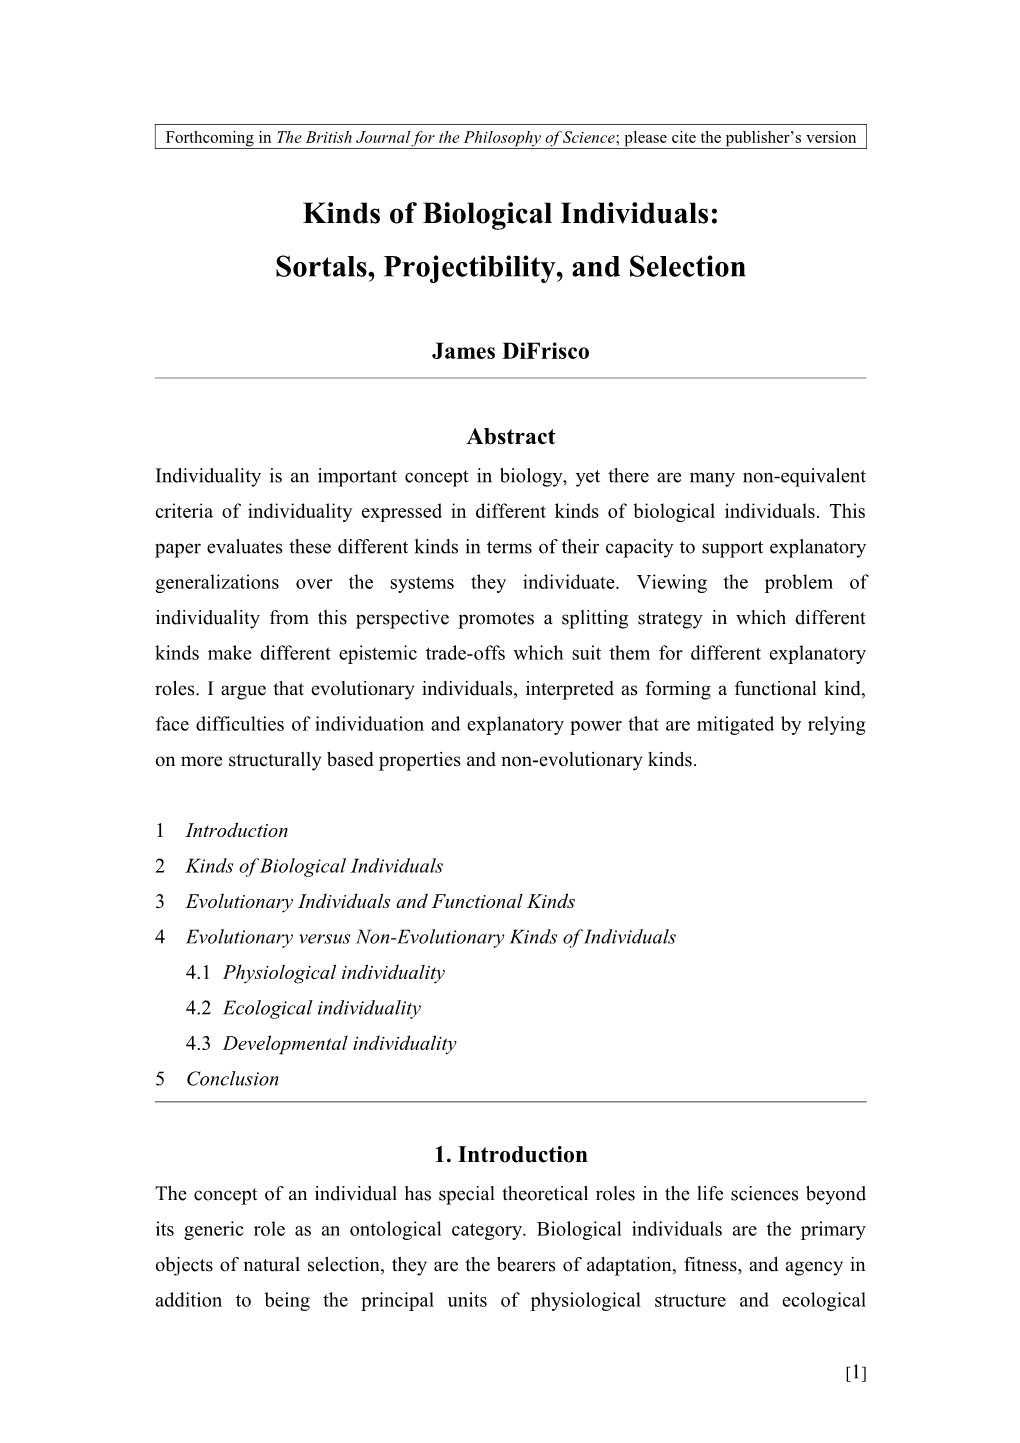 Sortals, Projectibility, and Selection